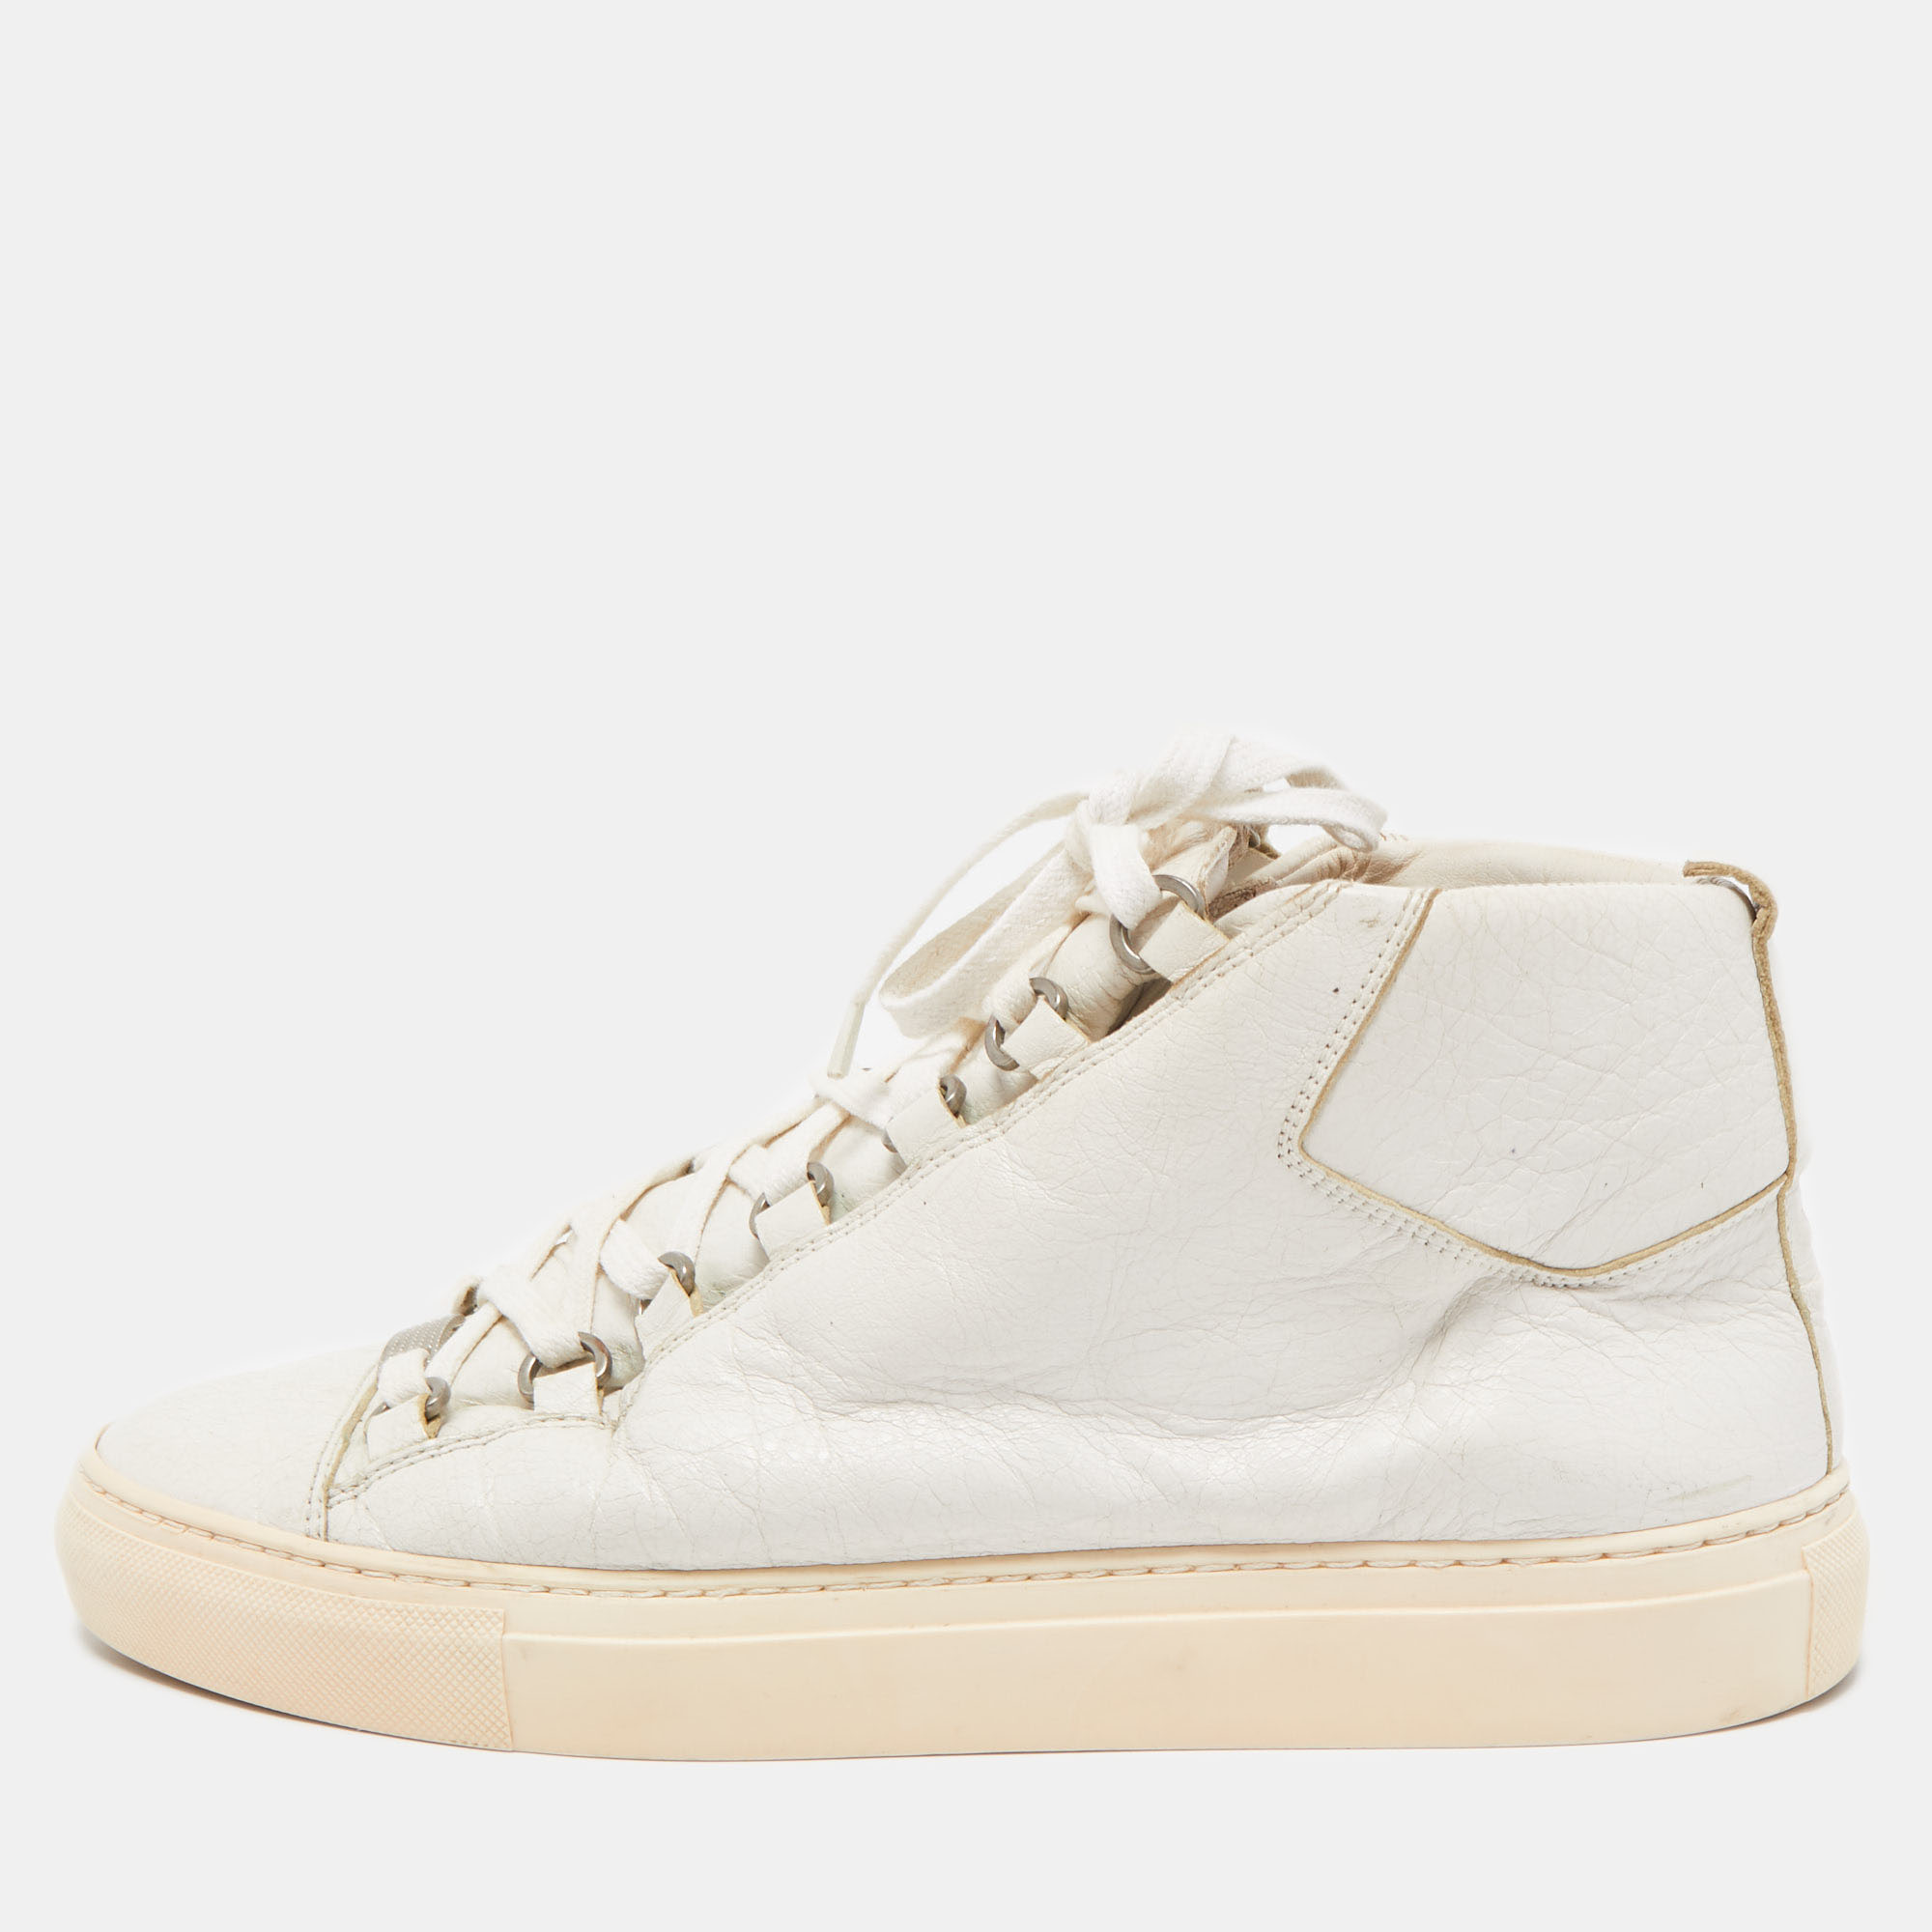 Pre-owned Balenciaga White Leather Arena High Top Sneakers Size 40